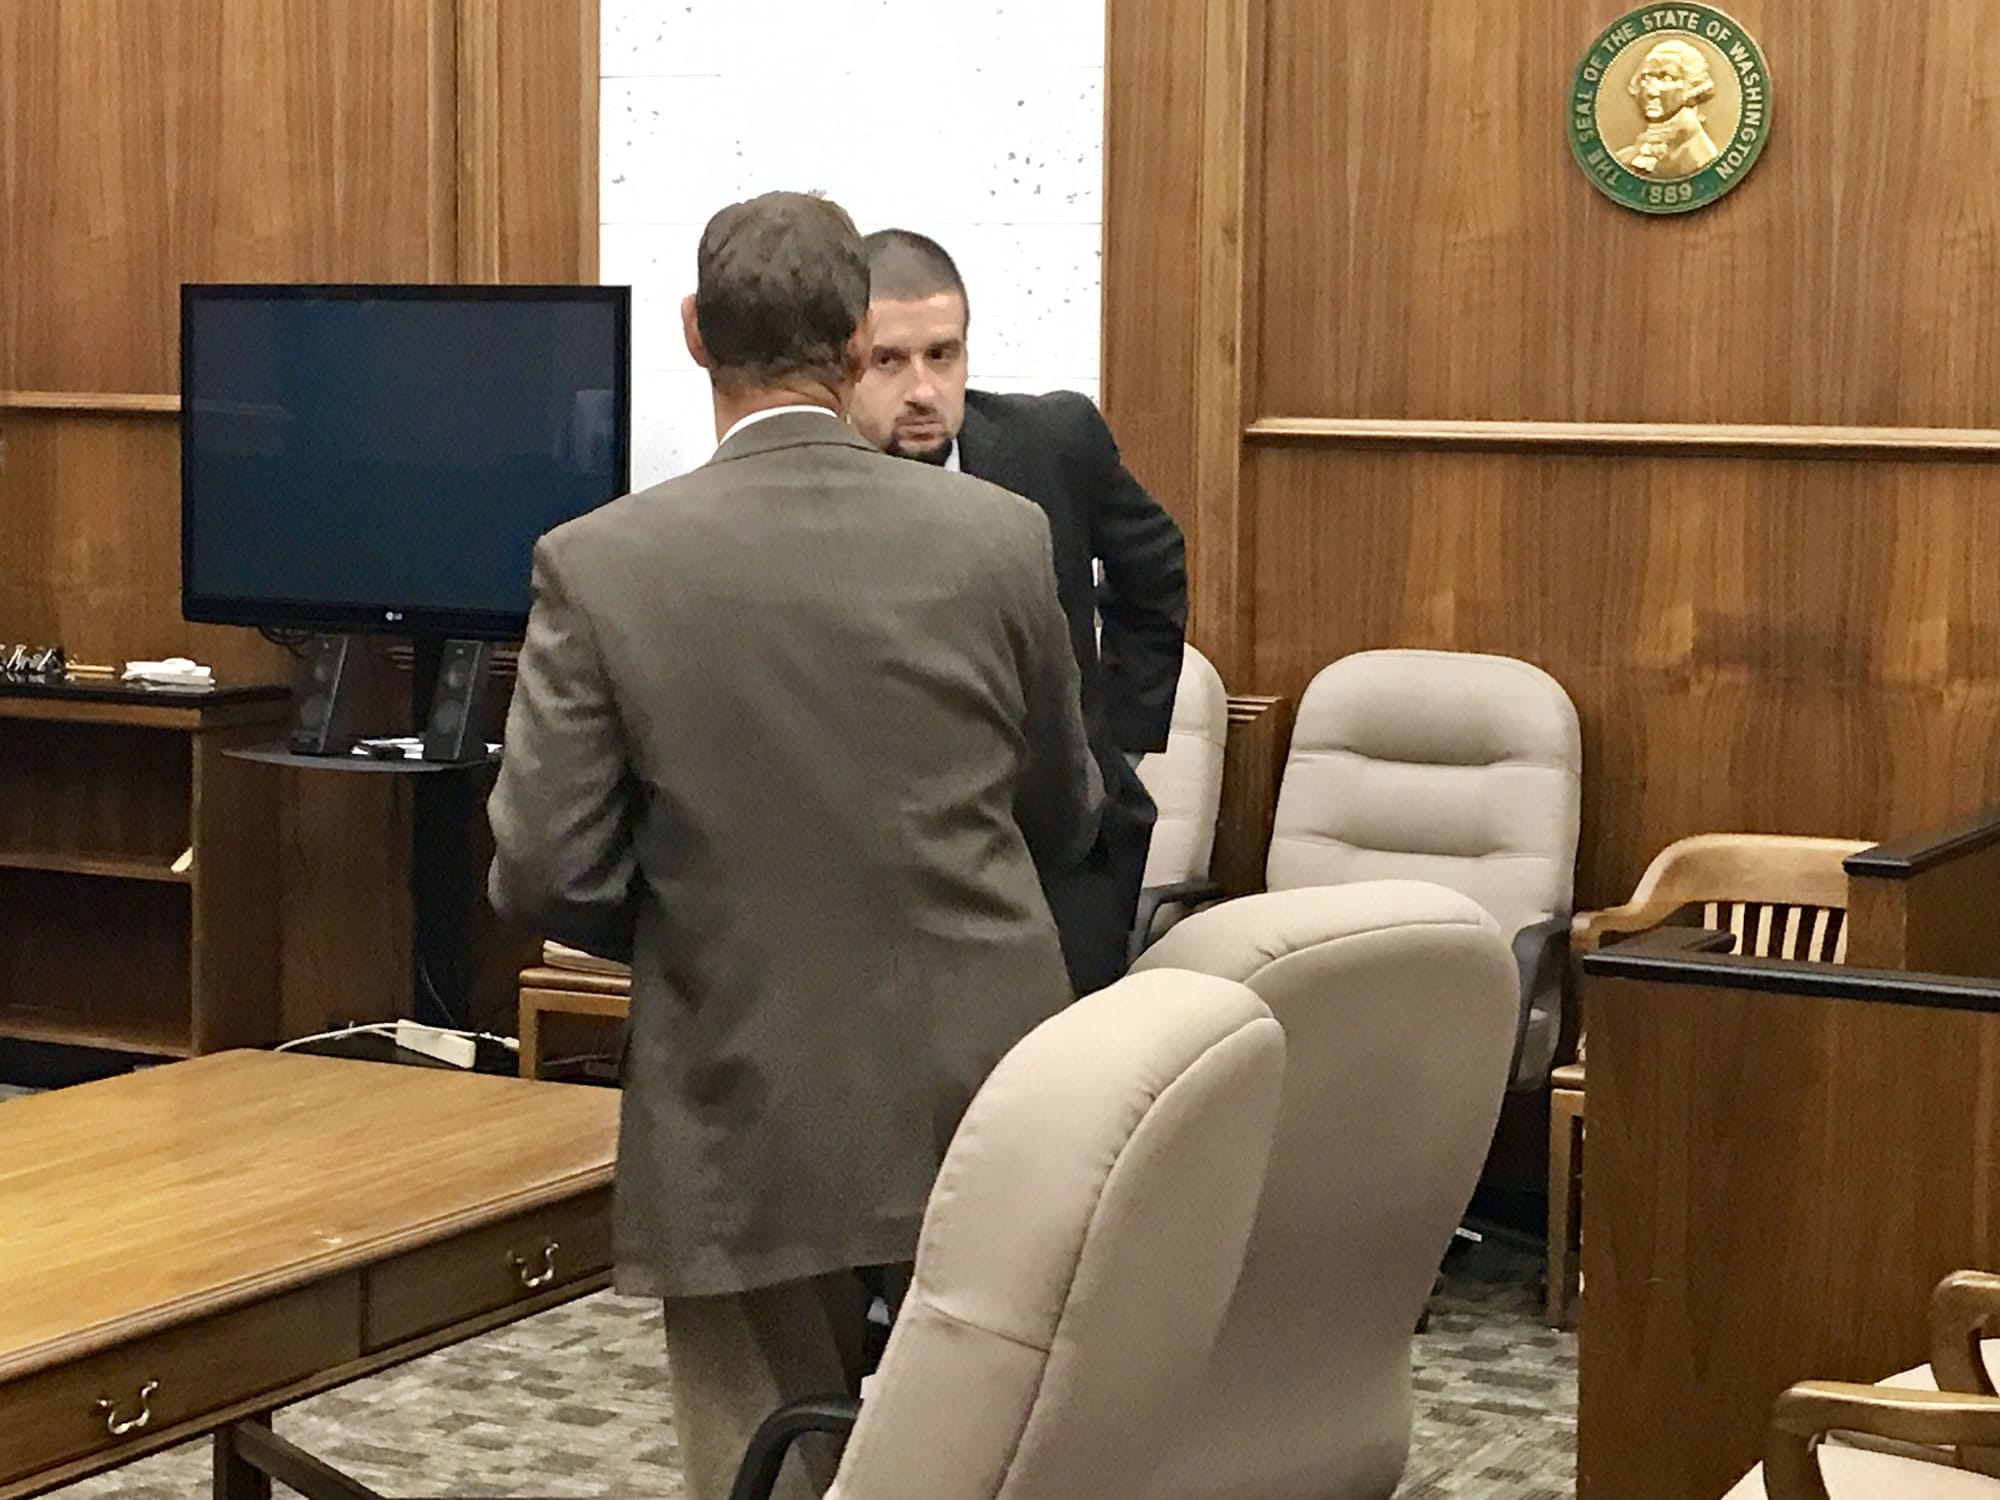 Vancouver's Brandon Gorham briefly talks with his attorney Friday, Sept. 8, 2017, after hearing the verdict in his attempted murder trial in Clark County Superior Court. The jury acquitted Gorham of attempted murder but convicted him of first-degree assault and hit-and-run resulting in injury.